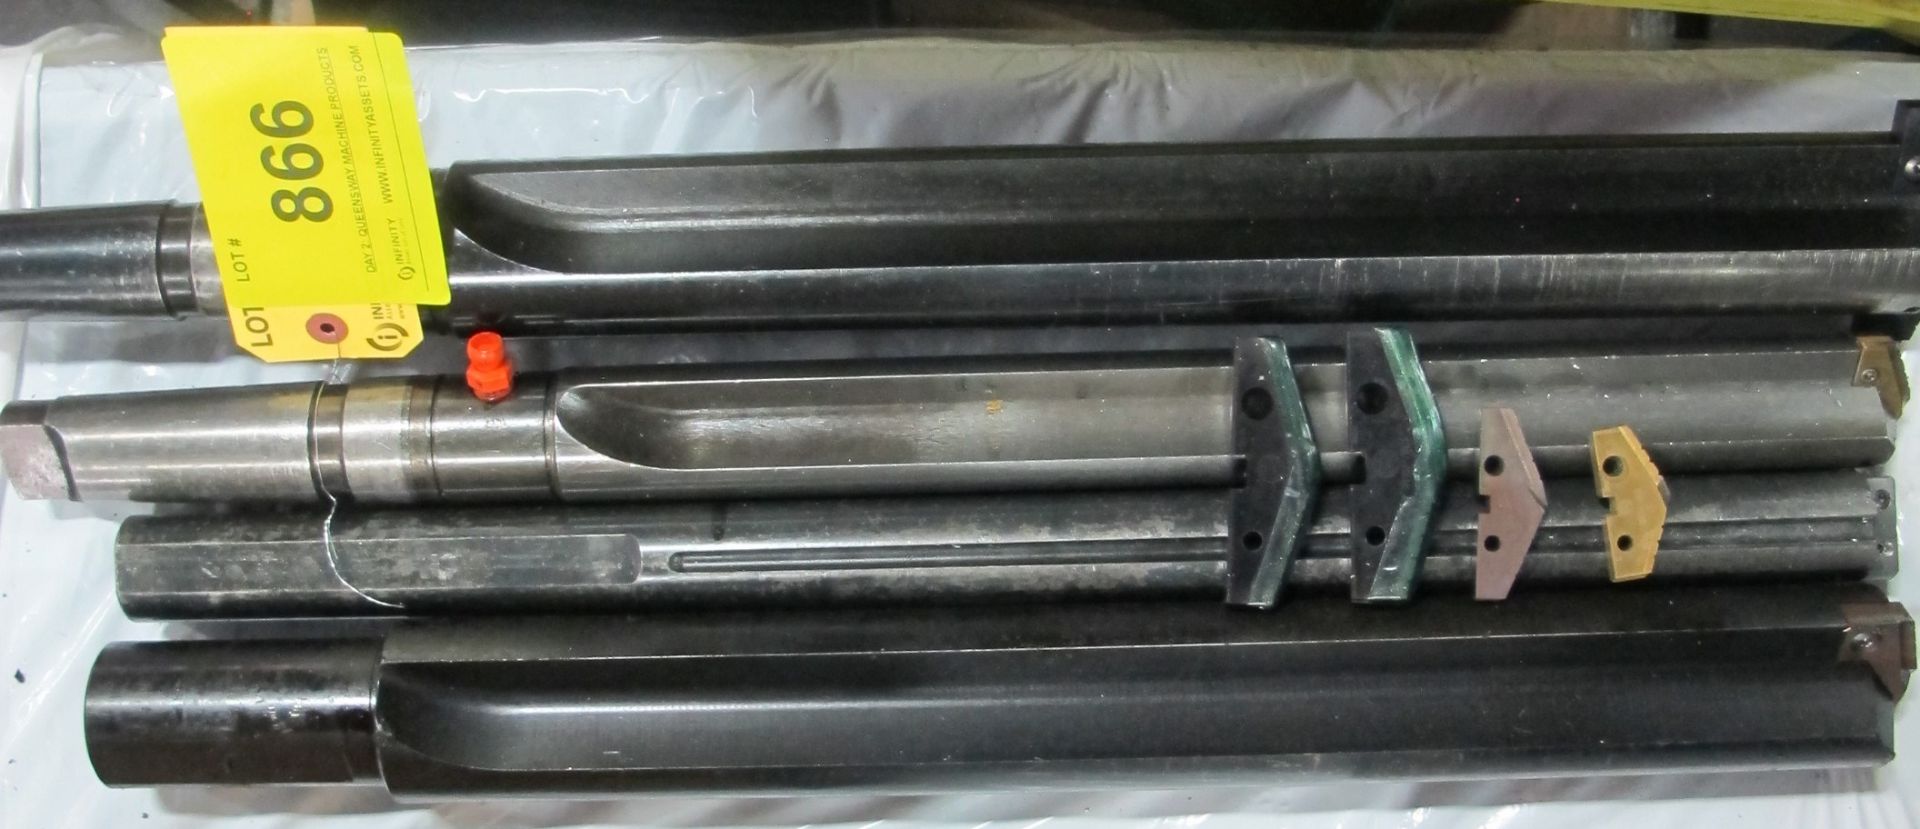 LOT OF (4) BORING BARS W/ CUTTING ATTACHMENTS - Image 2 of 2